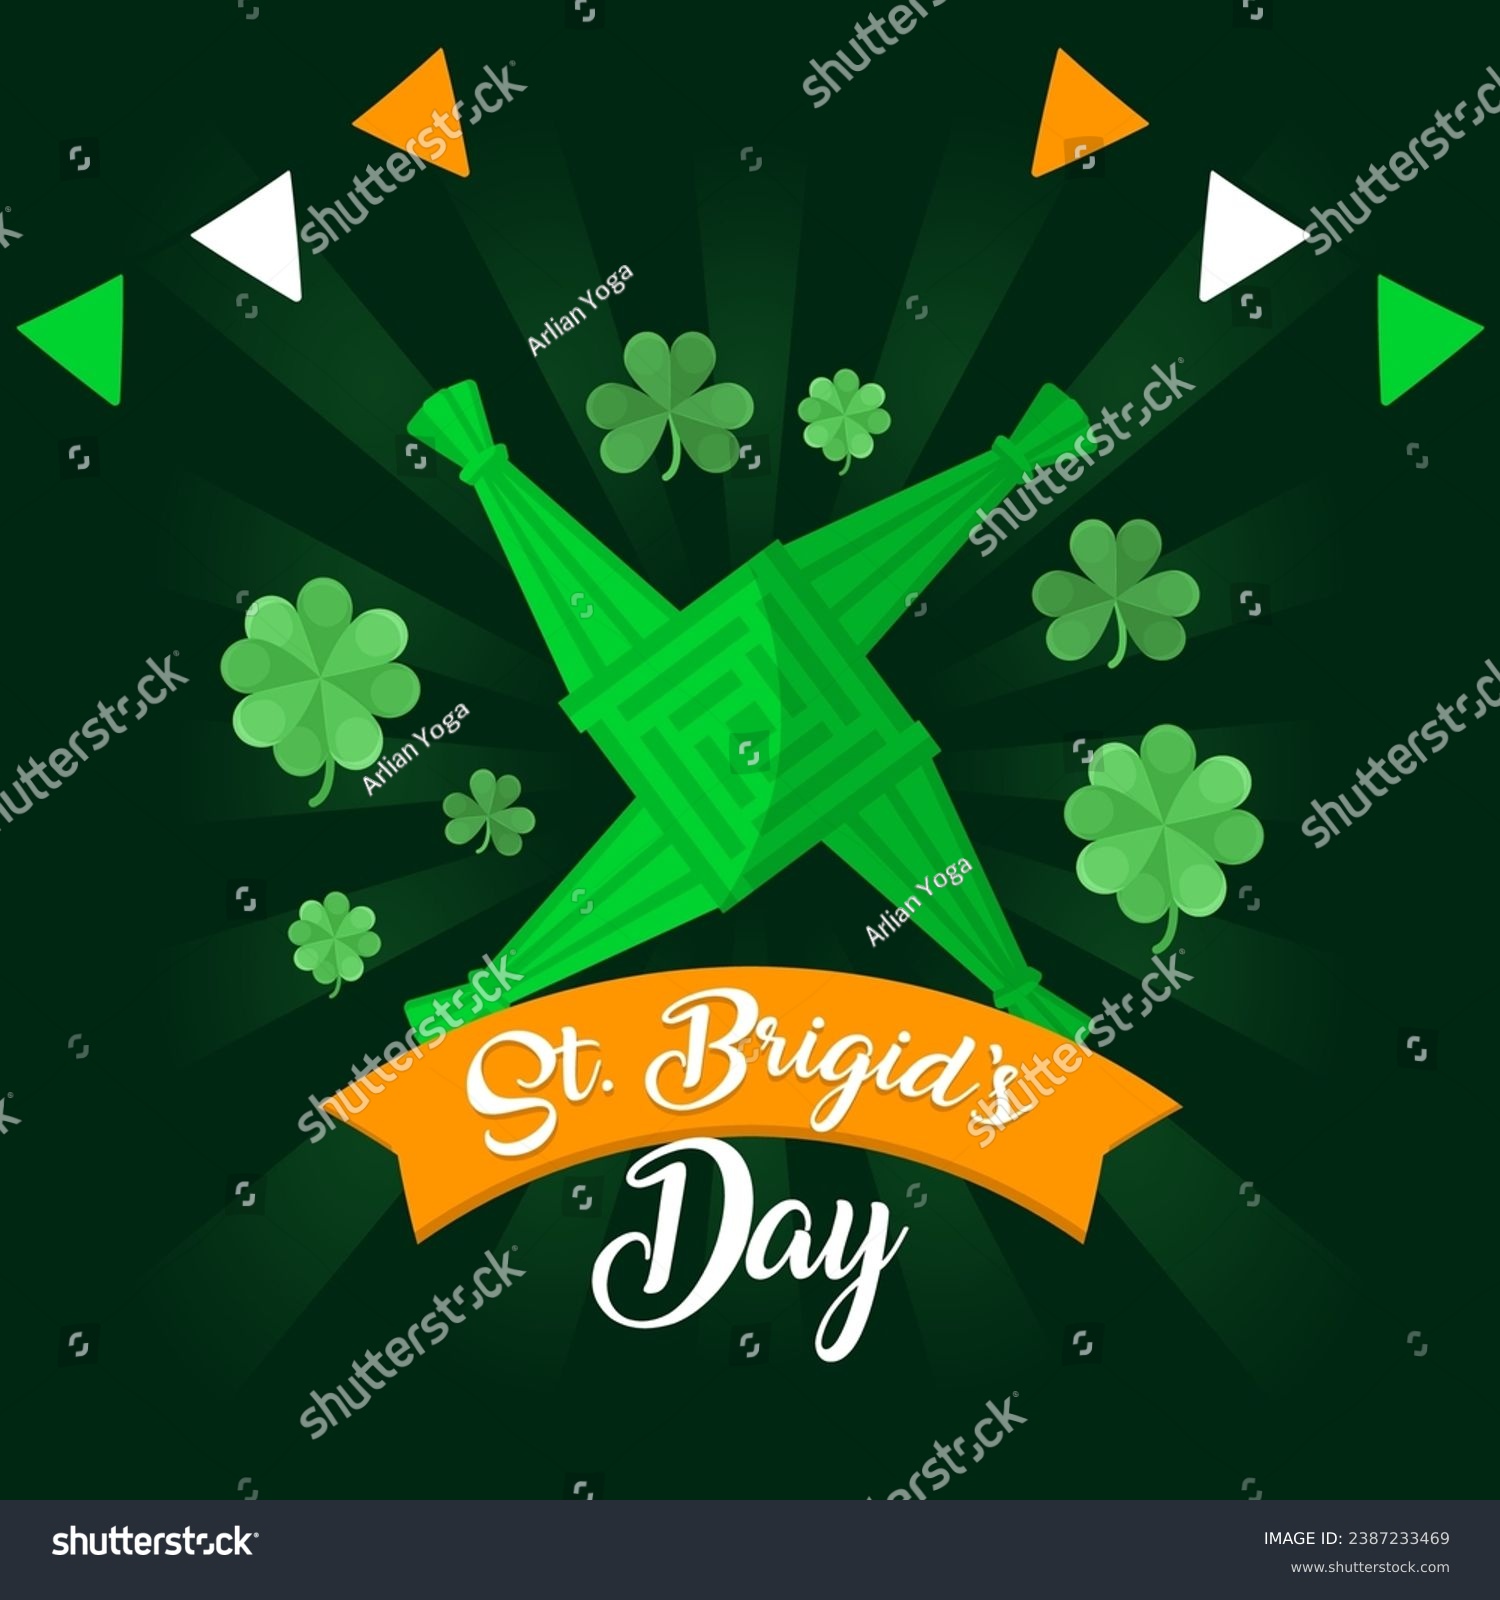 SVG of Happy St. Brigid’s Day. The Day of Ireland illustration vector background. Vector eps 10 svg